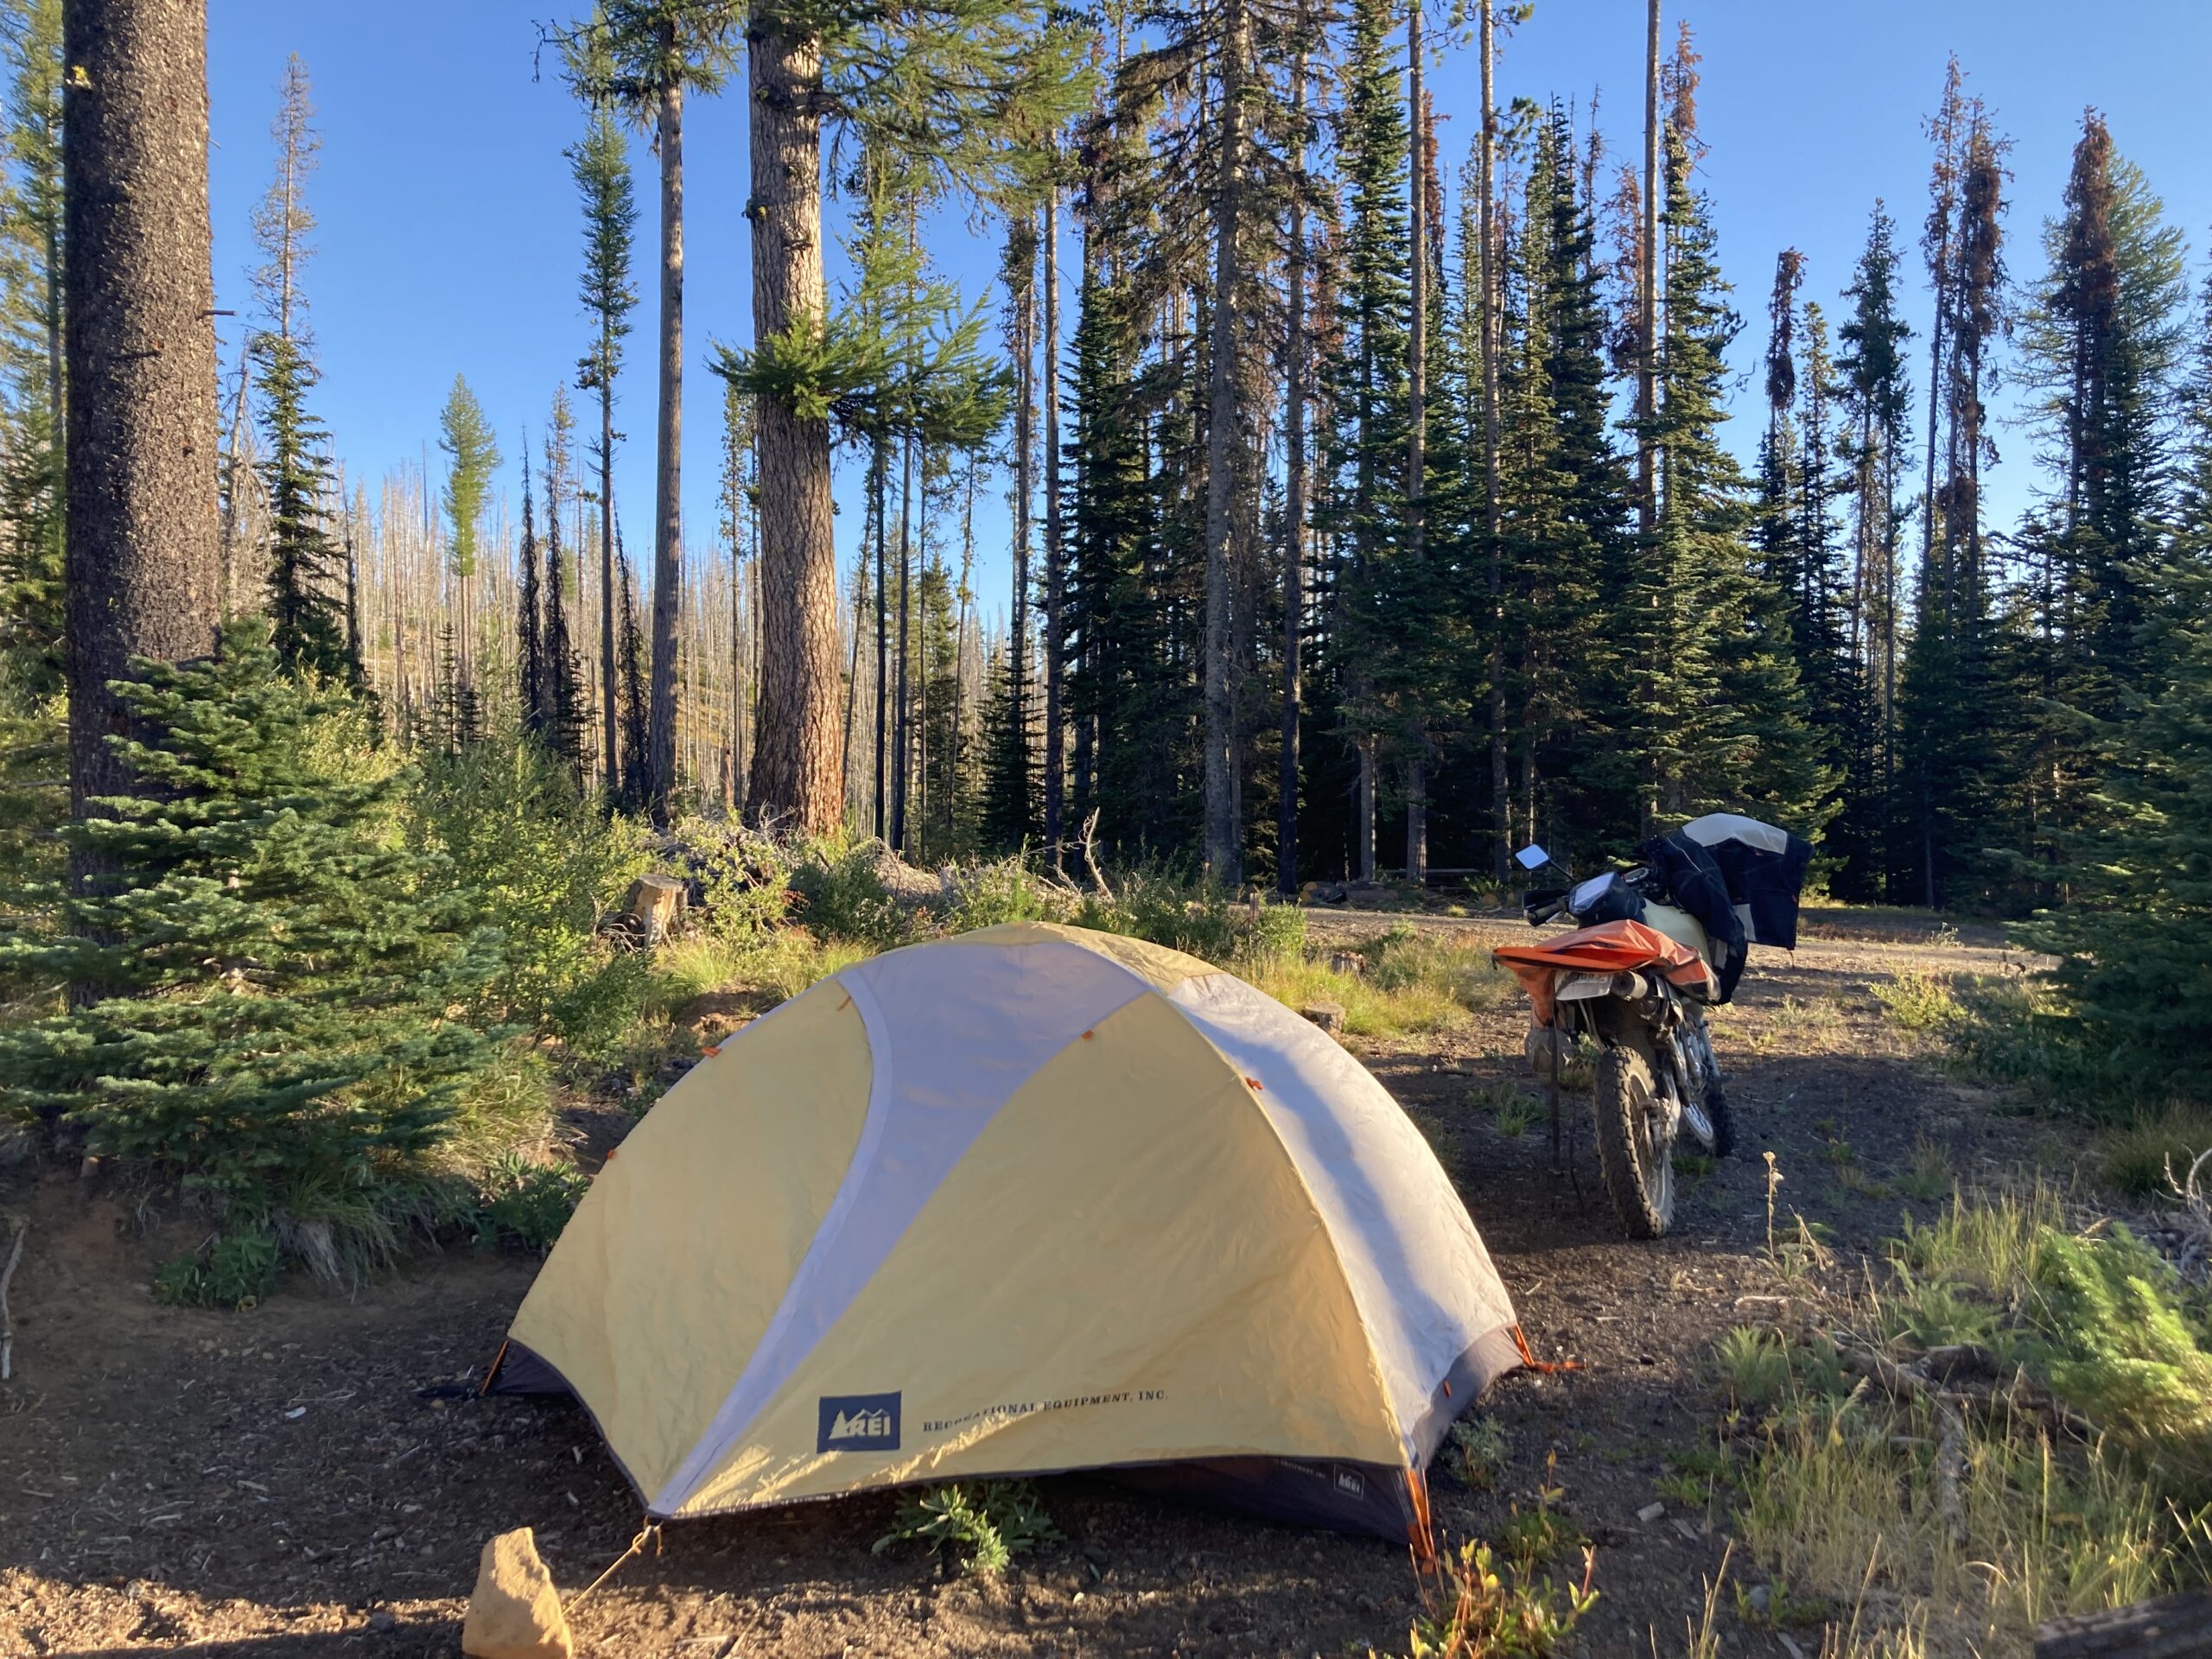 Motocamping the WABDR